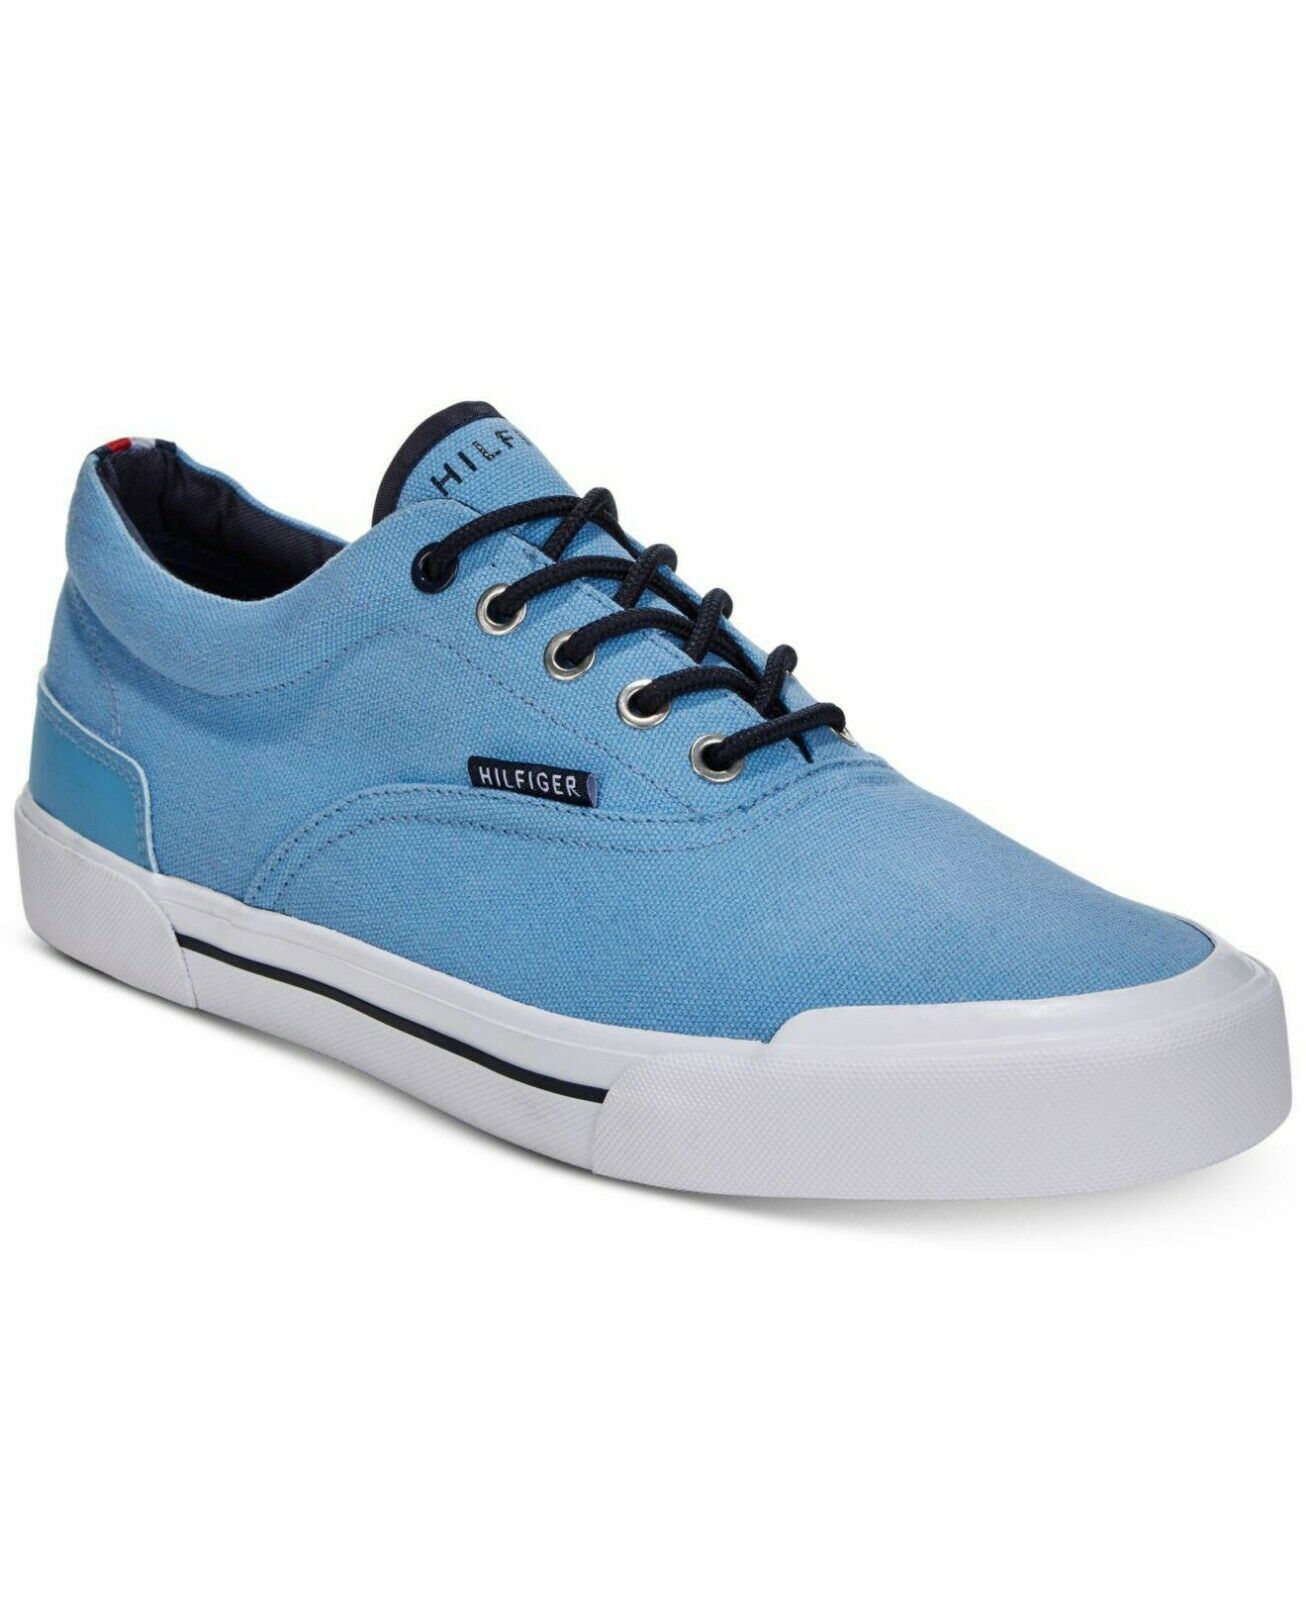 Tommy Hilfiger TH Pallet Light Blue Casual Canvas Sneaker Boat Deck ...